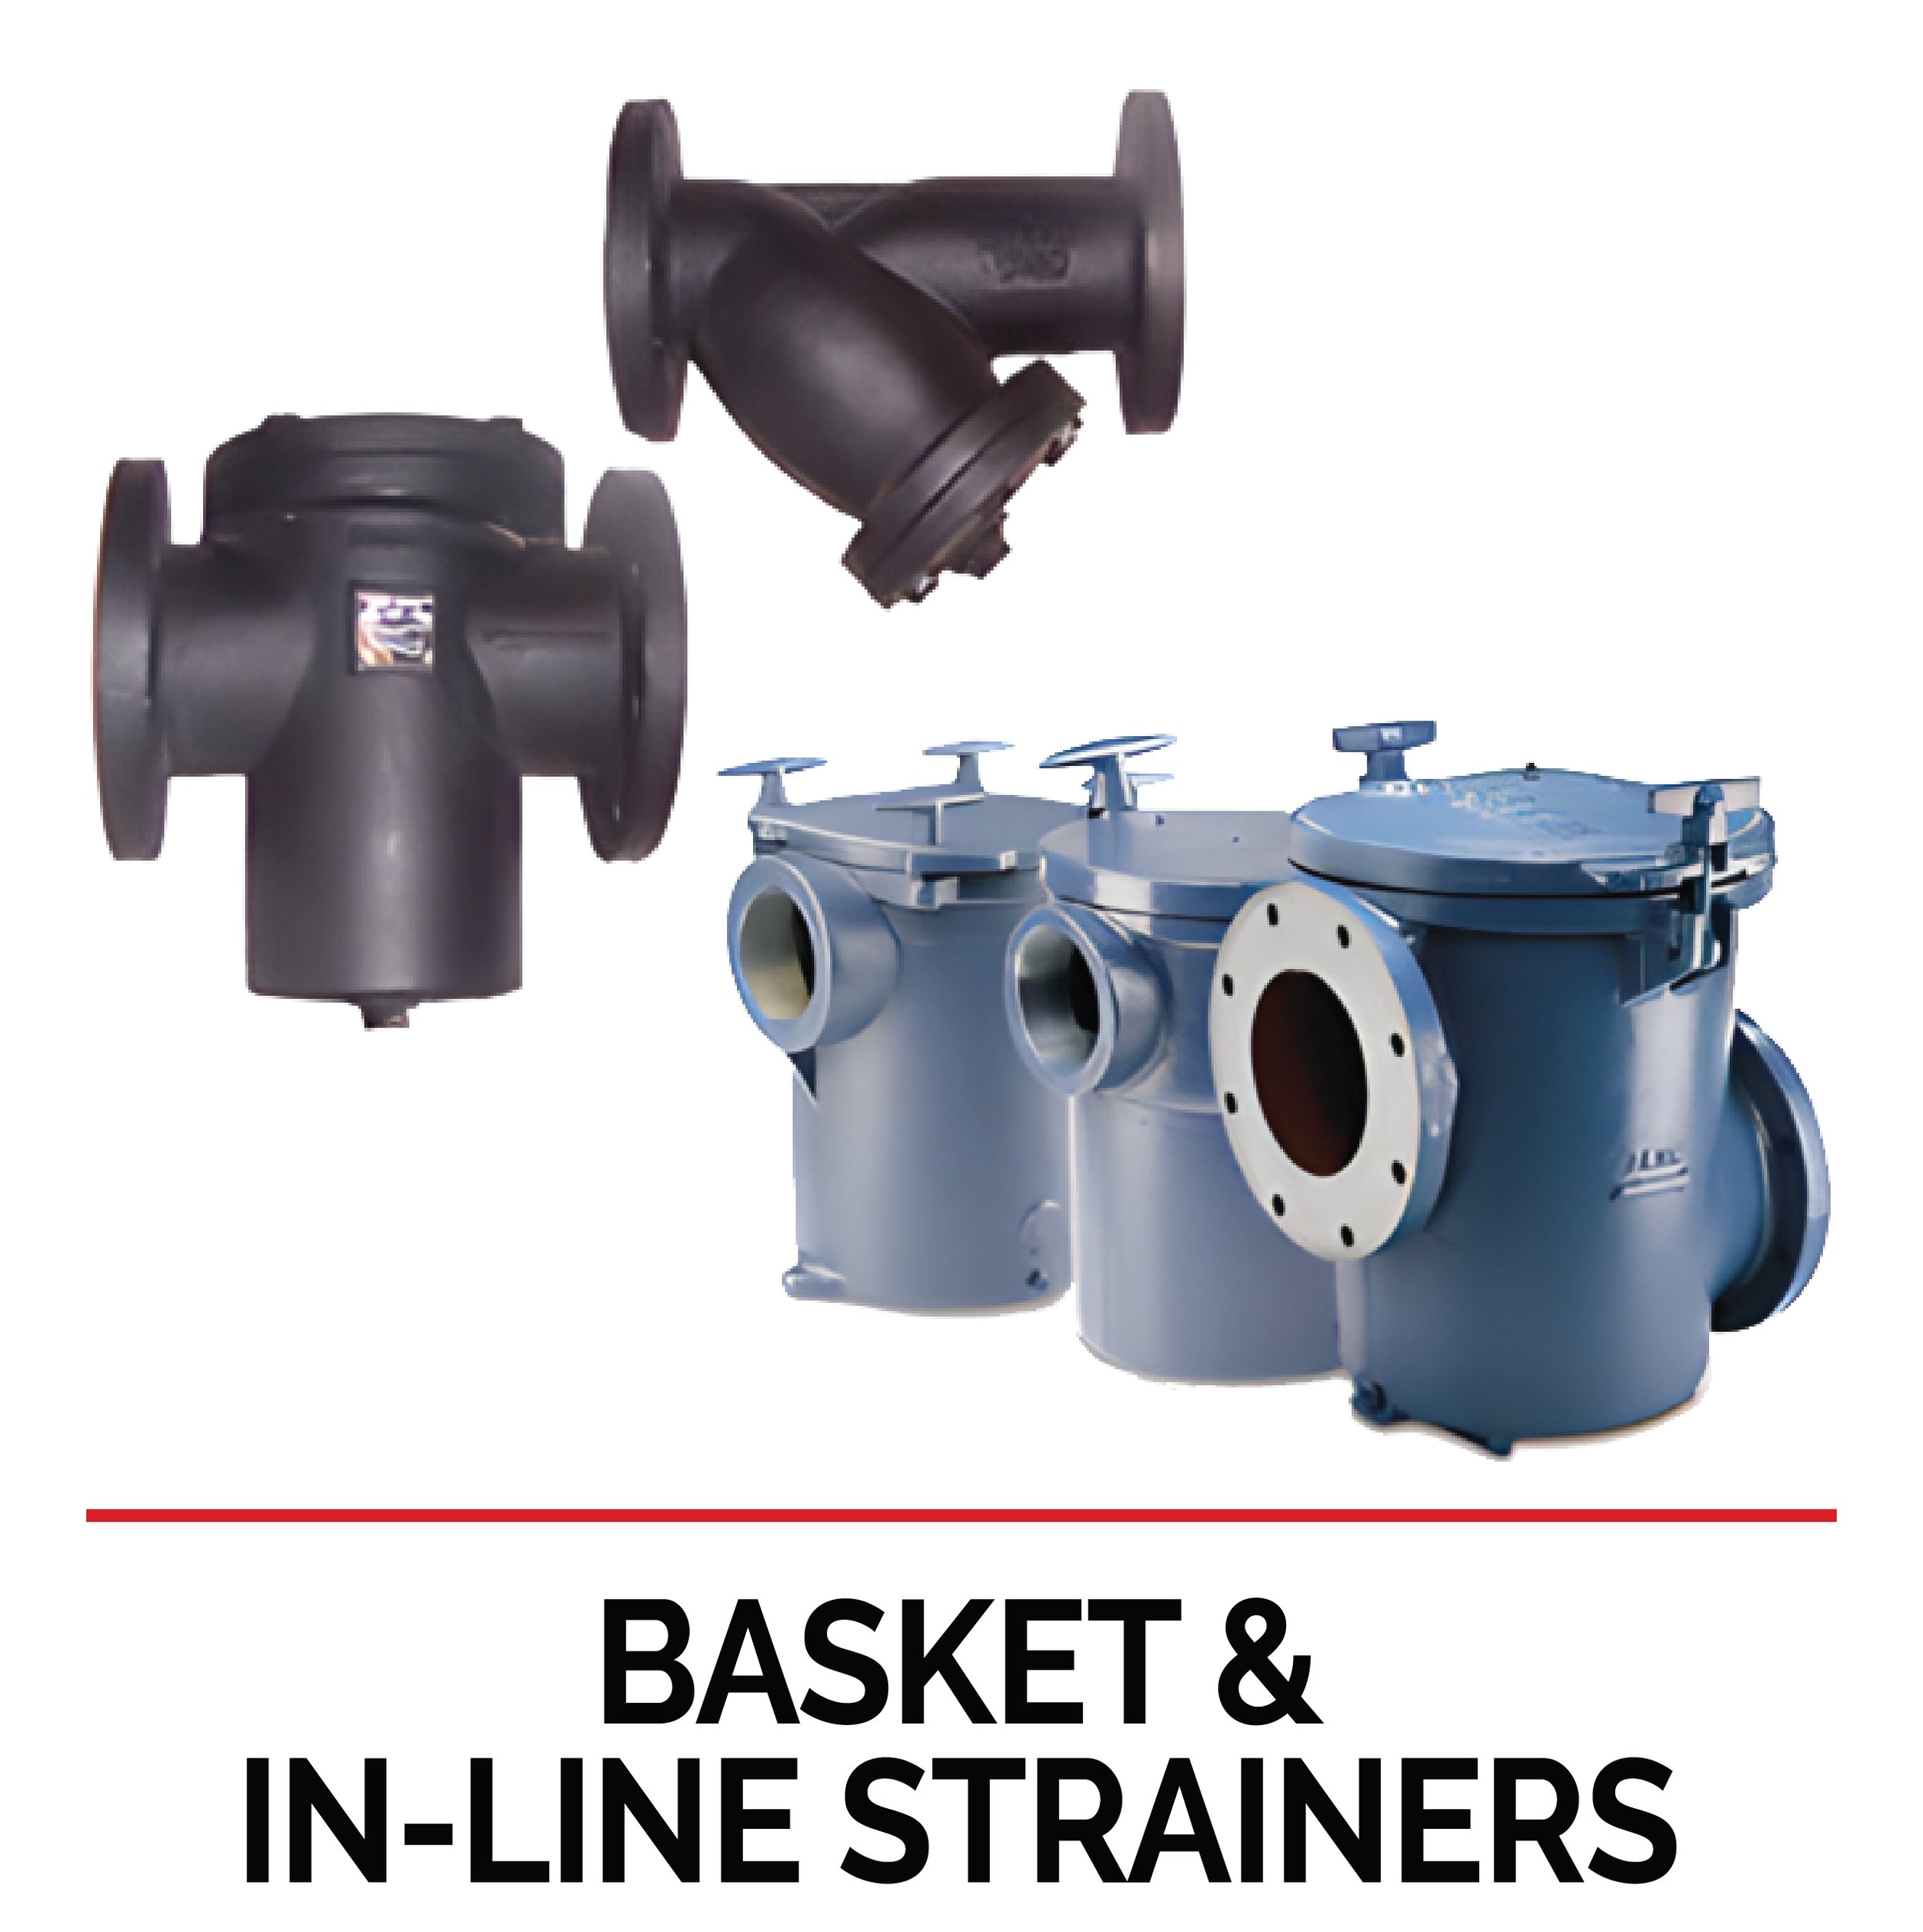 basket and inline strainers.jpg